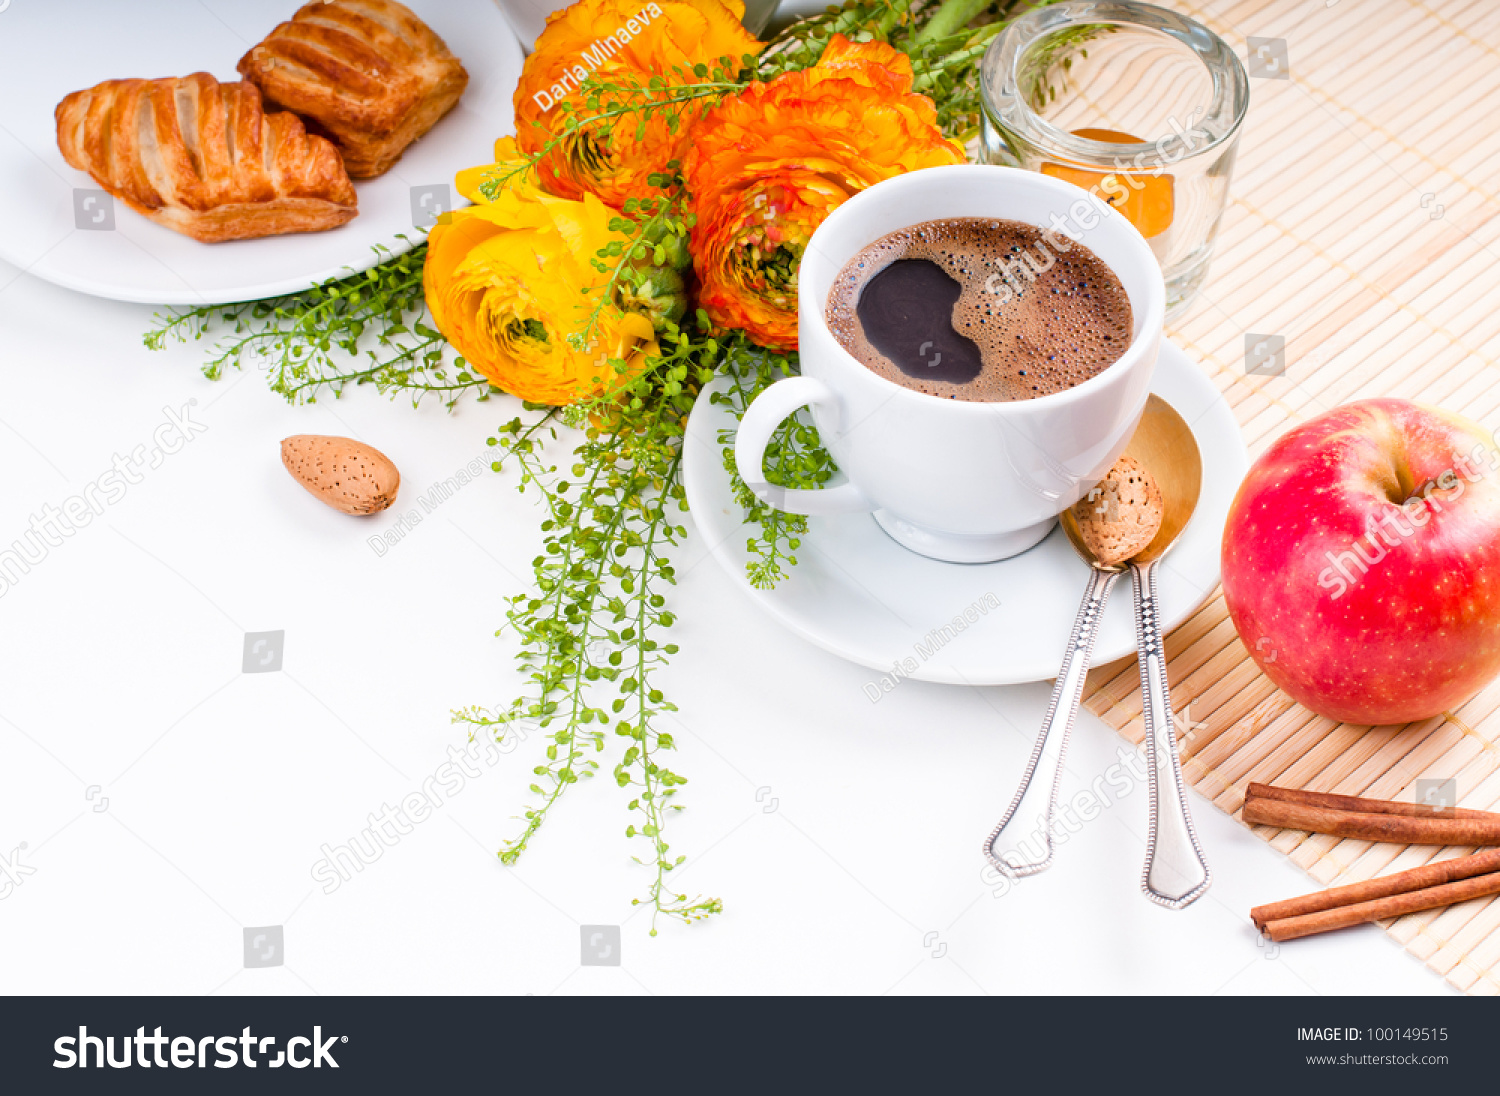 stock-photo-elegant-fresh-breakfast-coffee-fruit-pastries-and-flowers-on-a-white-background-100149515.jpg